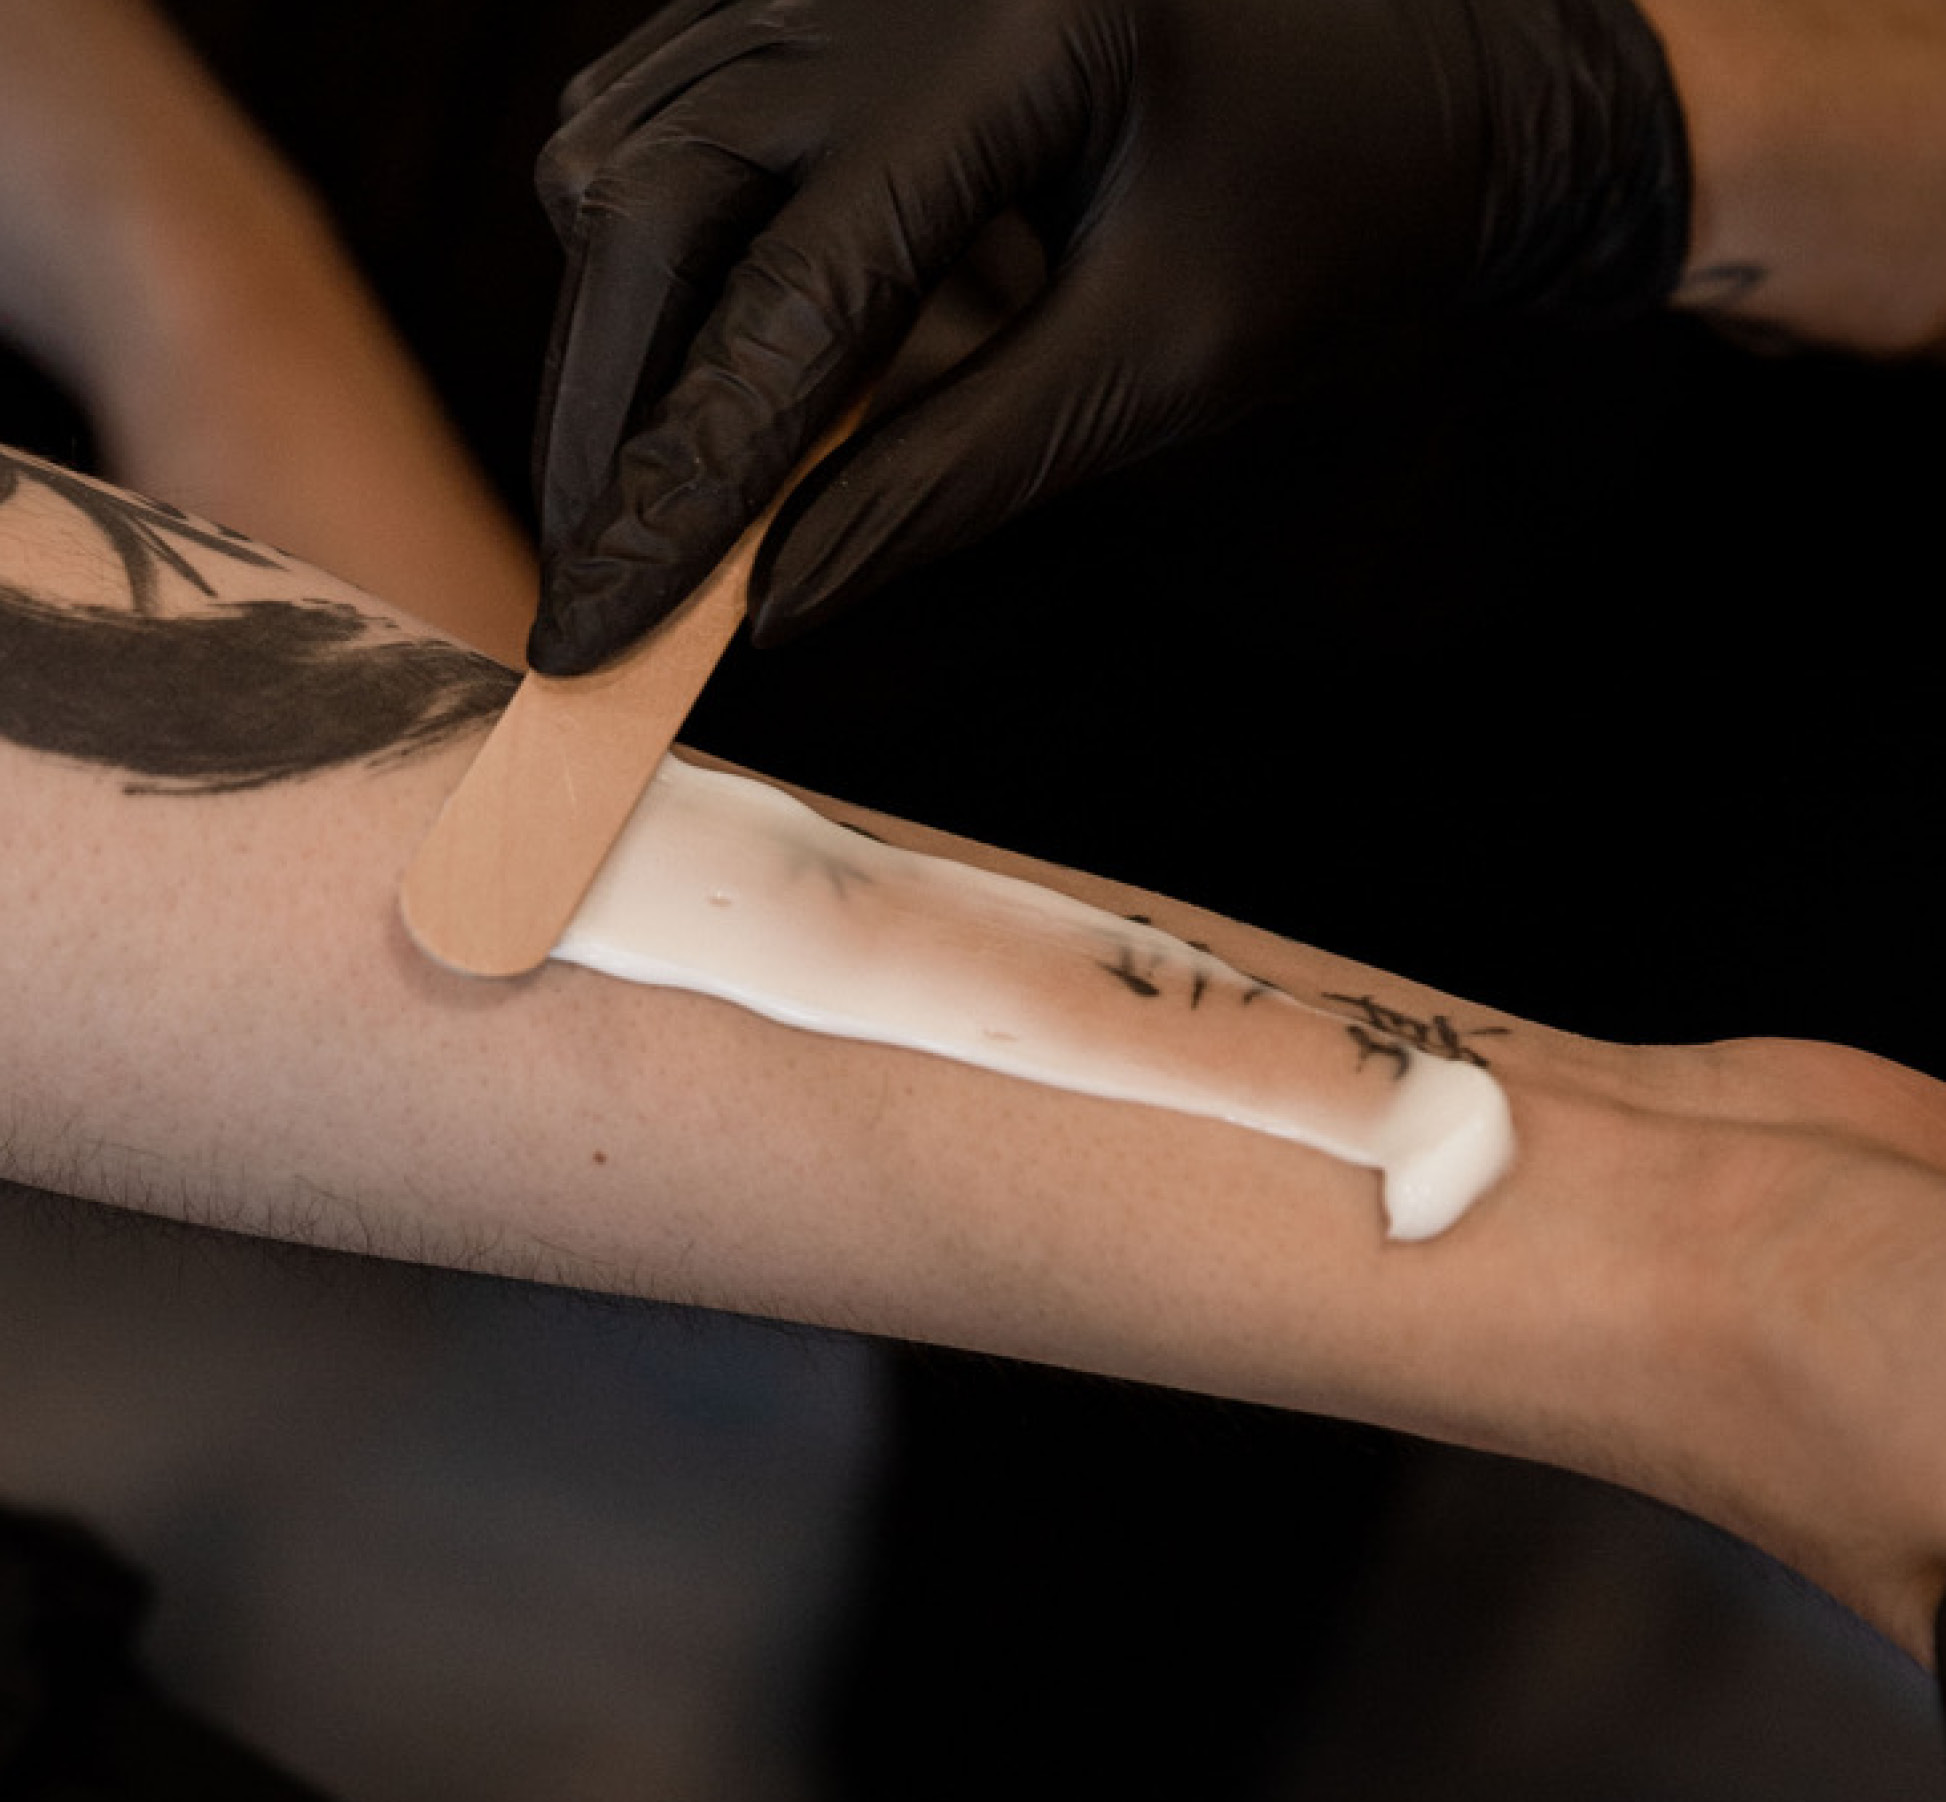 The Best Ways To Use Tattoo Numbing Cream For Every Procedure